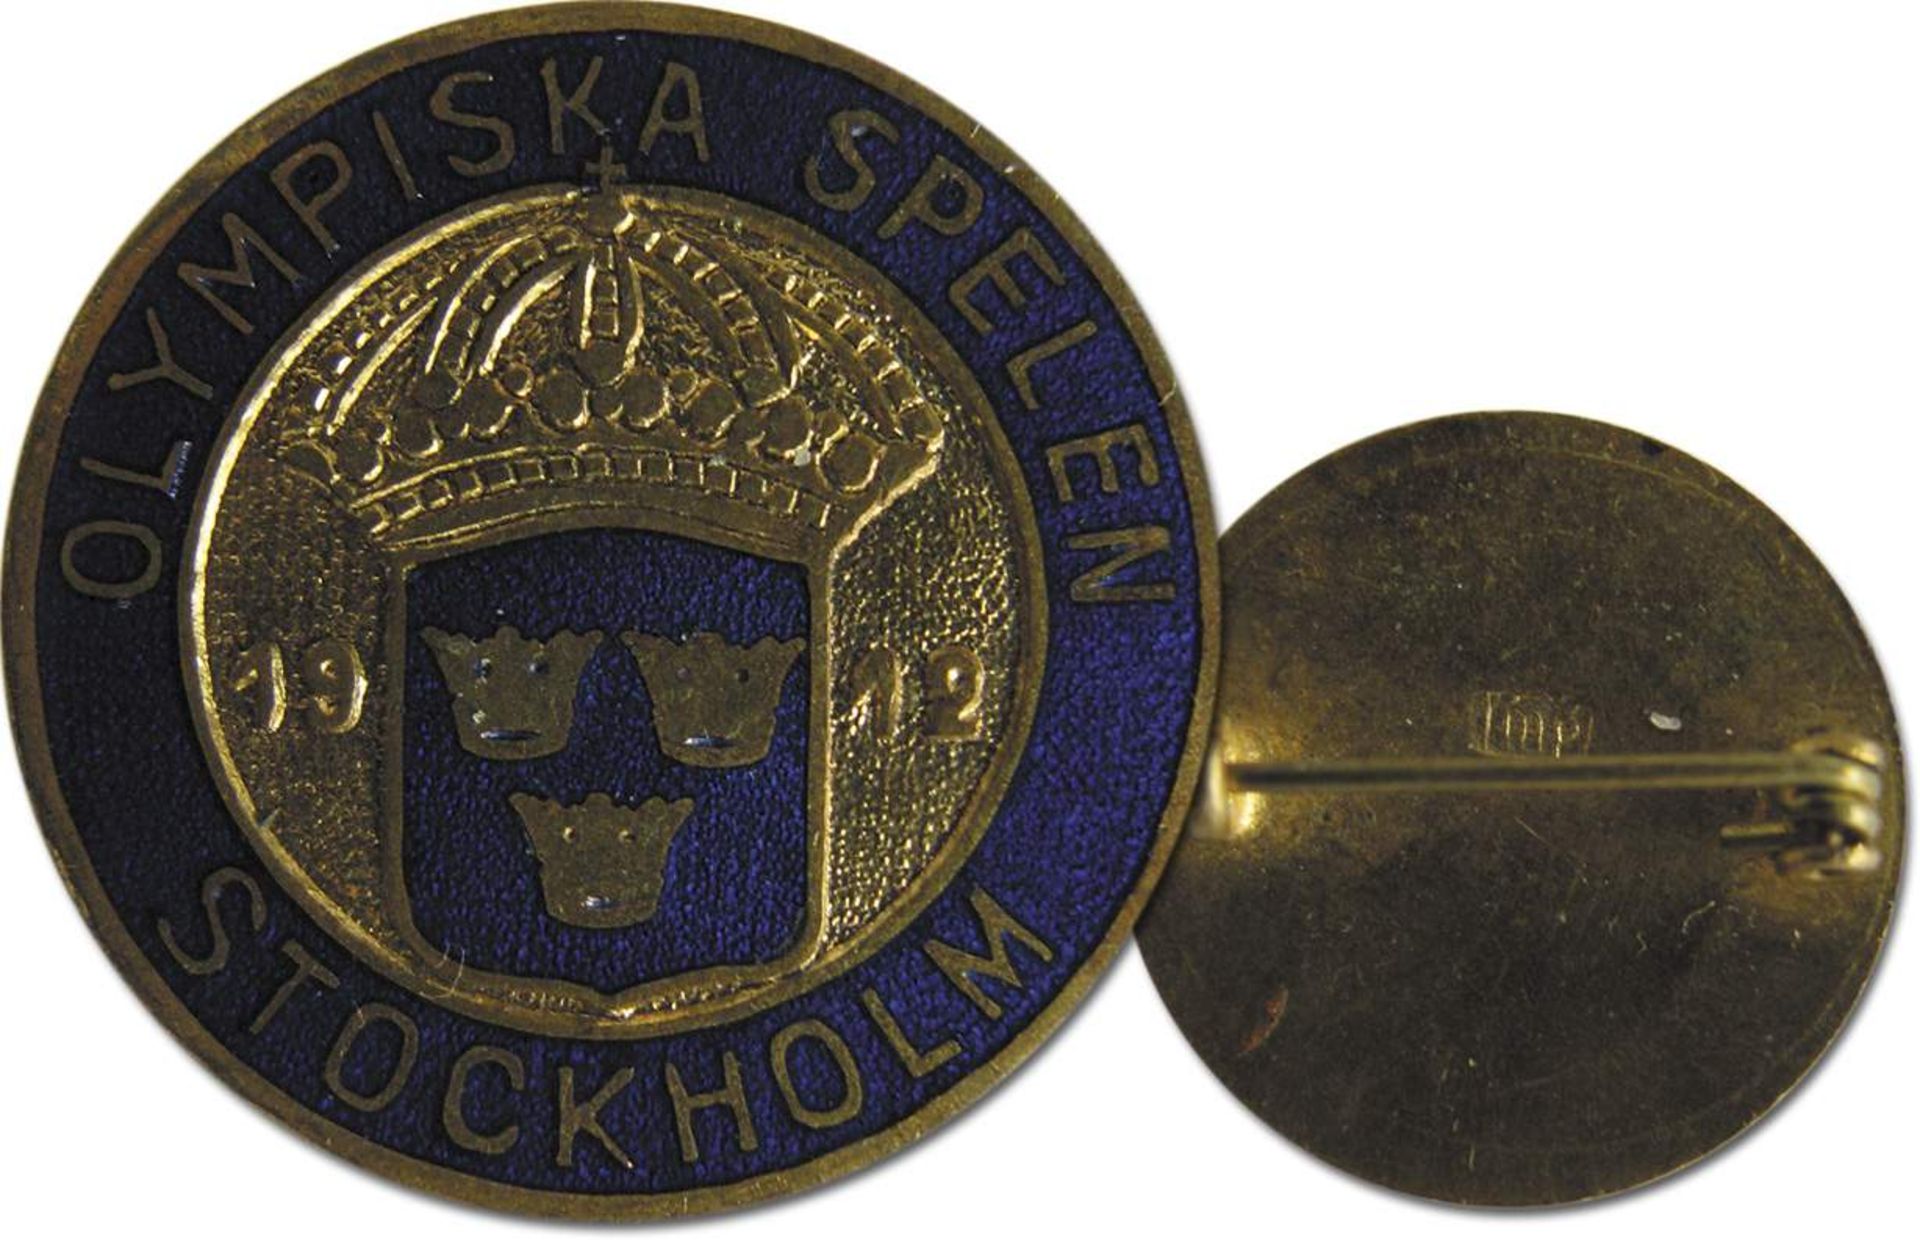 Olympic Games Stockholm 1912 badge Pin - Official badge for the Olympic Games in Stockholm 1912,